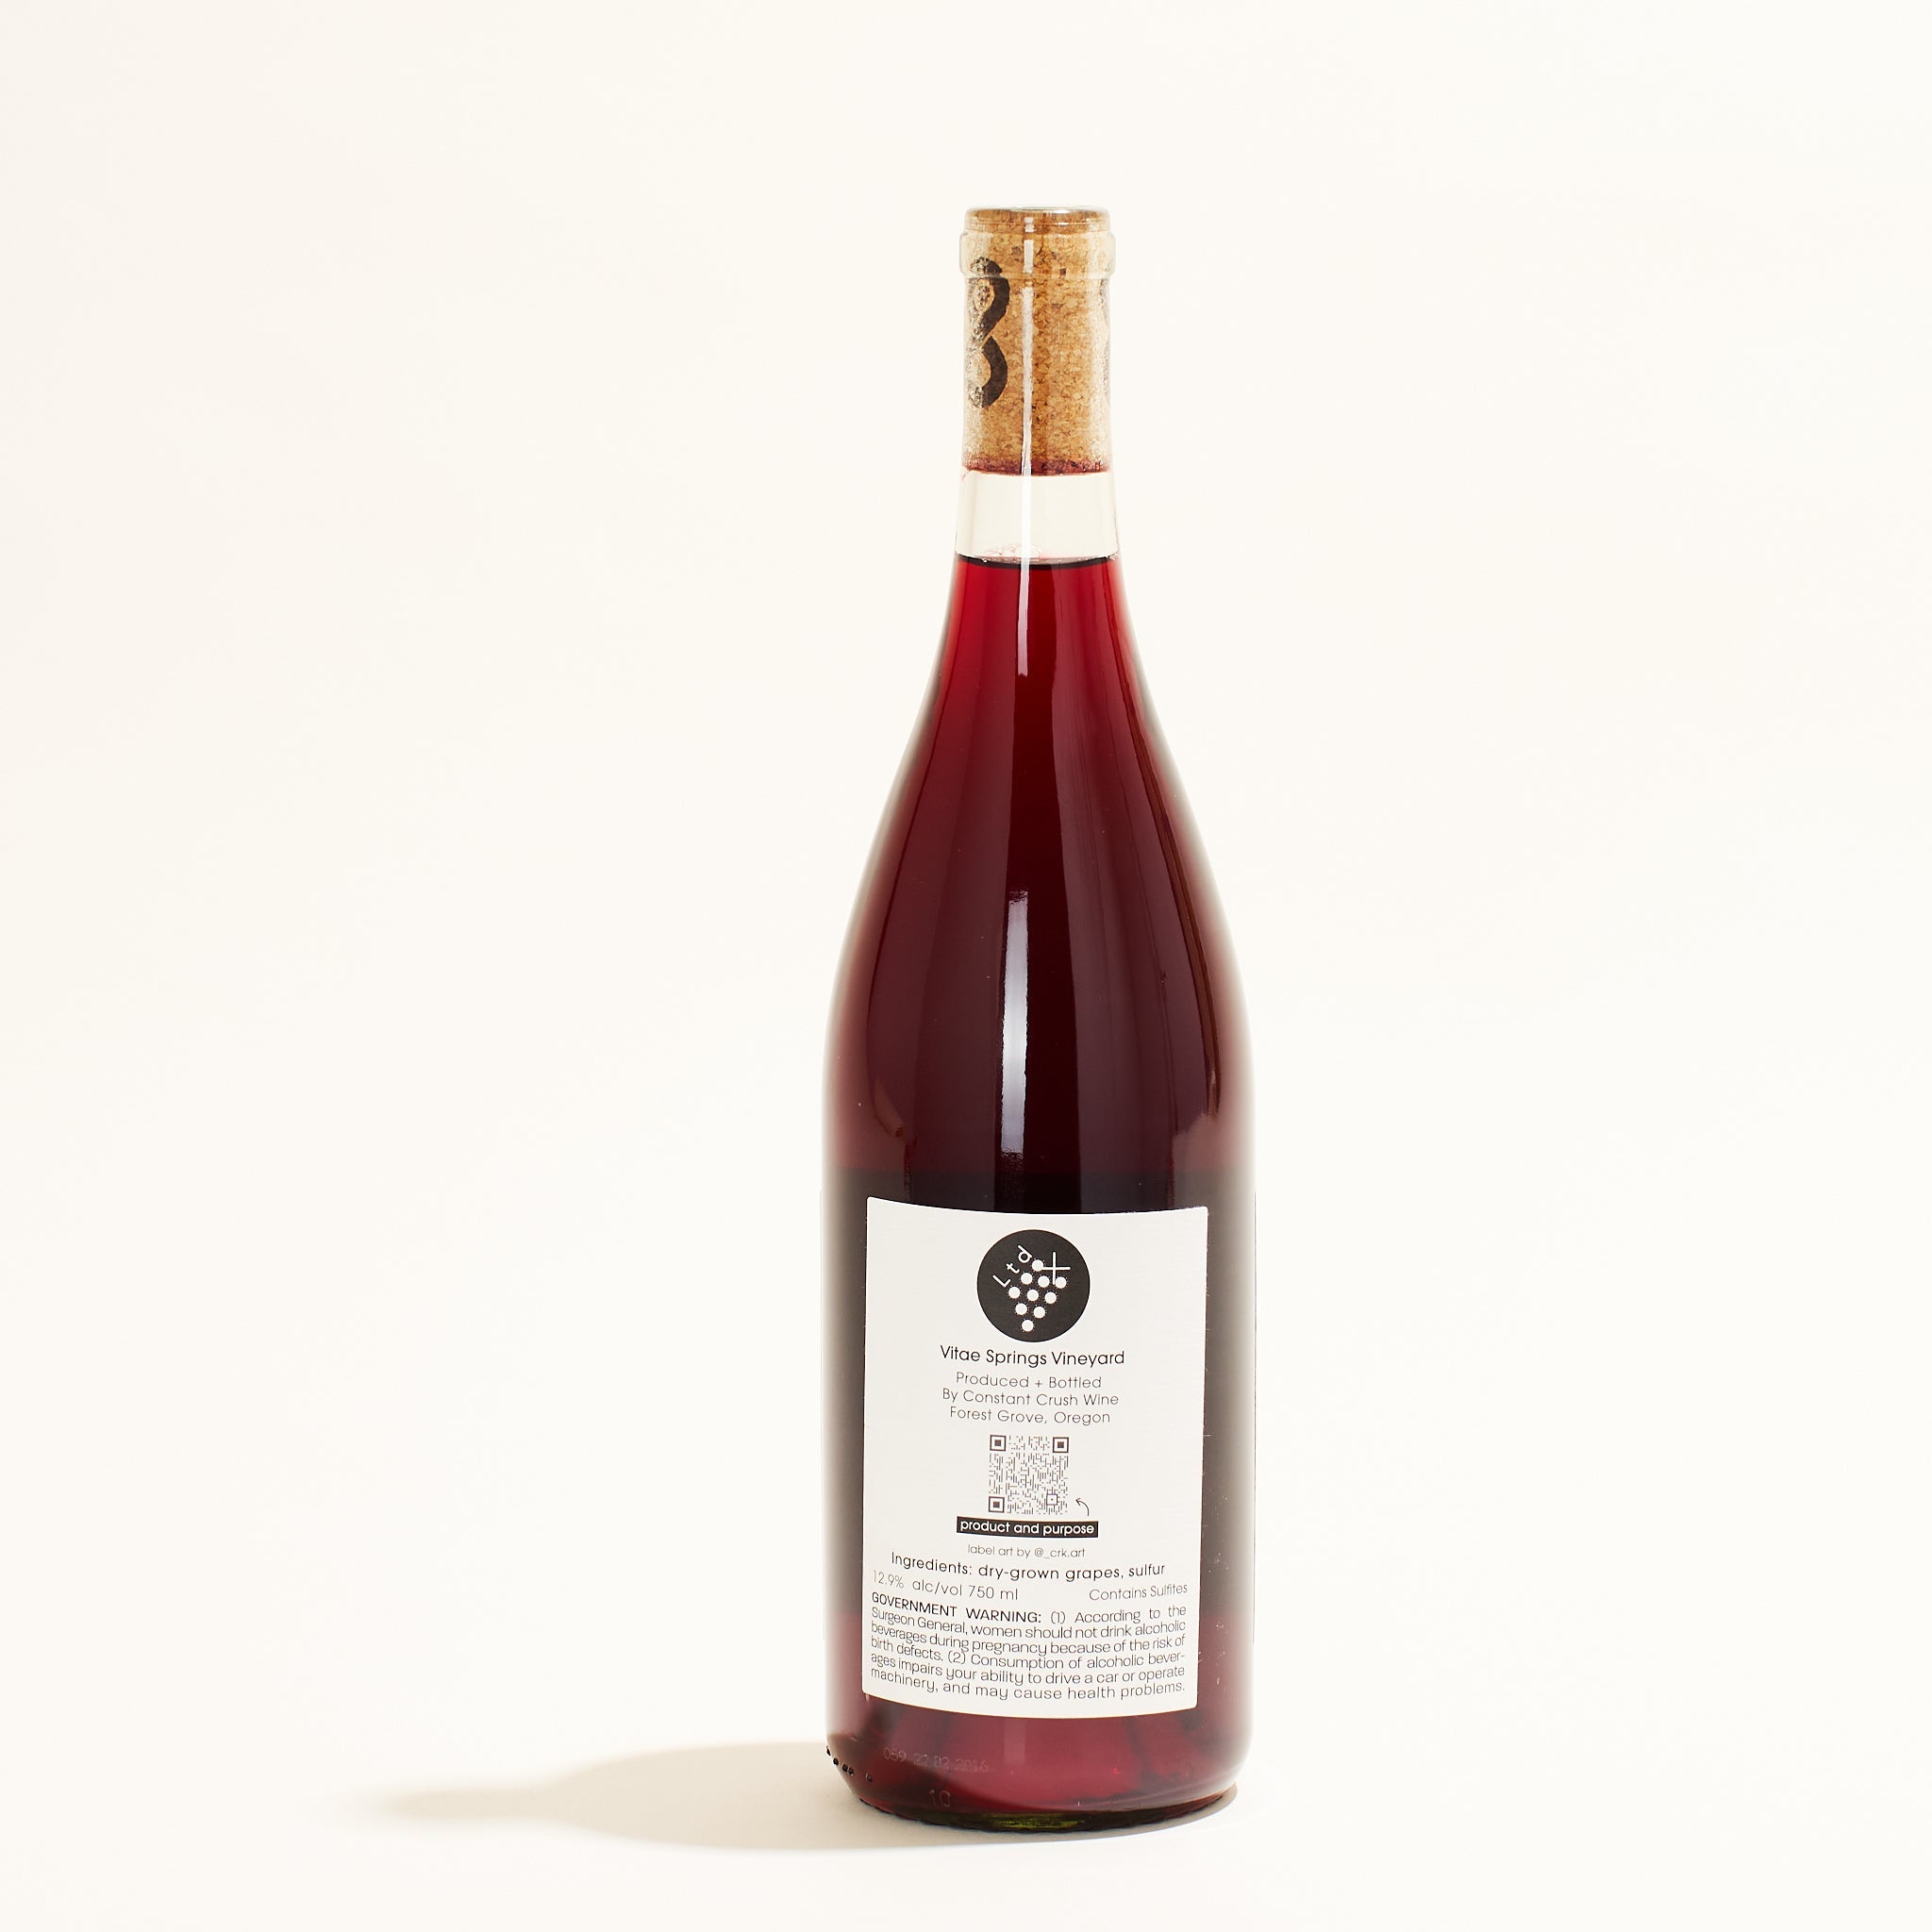 Vitae Springs Coferment PinotGris/Pinot noir Limited Addition natural red wine Eola-Amity Hills USA back